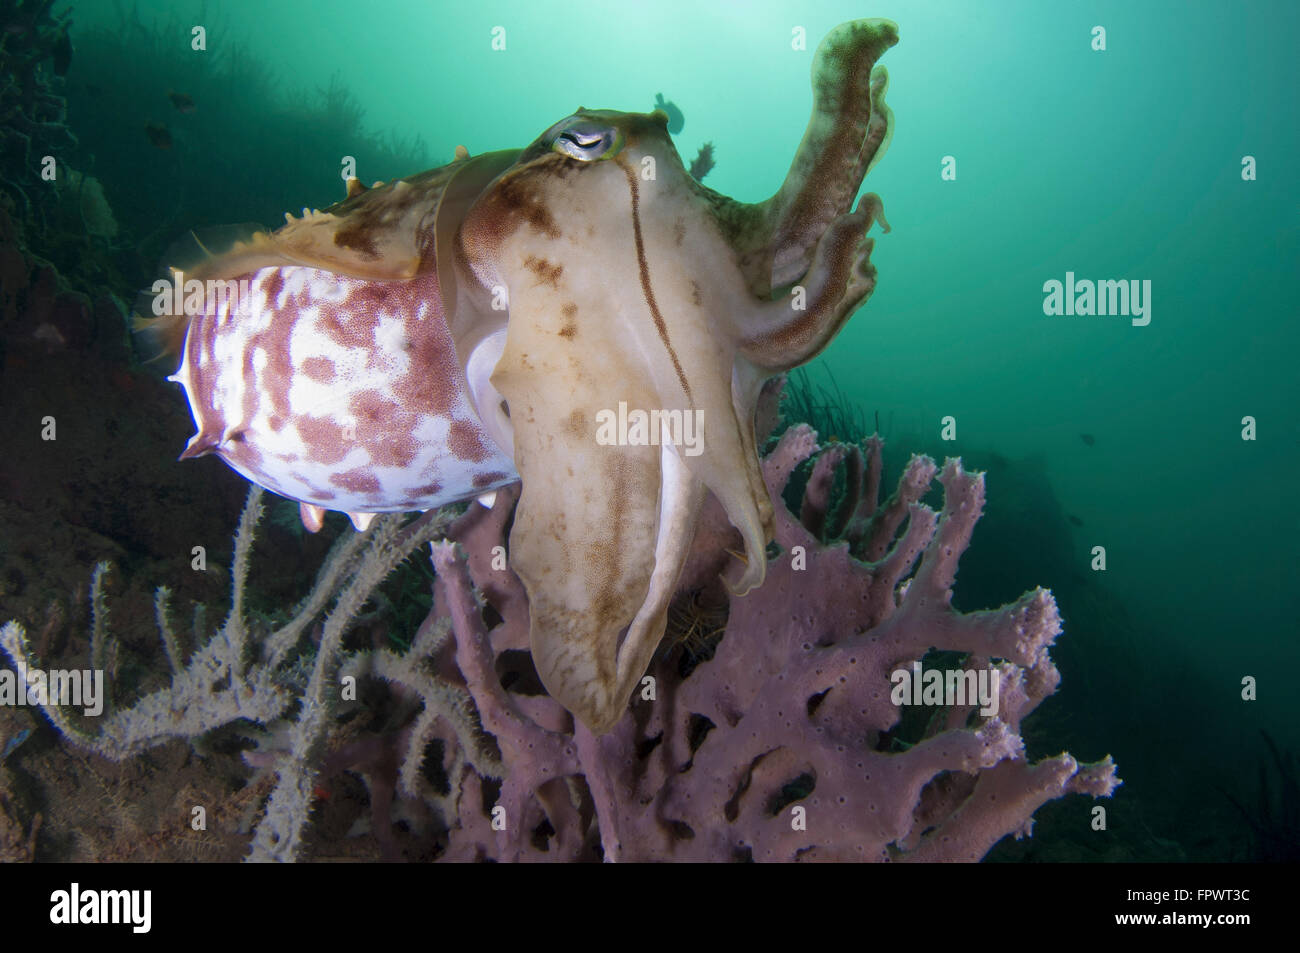 Full body view of a broadclub cuttlefish (Sepia latimanus) amongst a reef in green water, Komodo National Park, Indonesia. Stock Photo